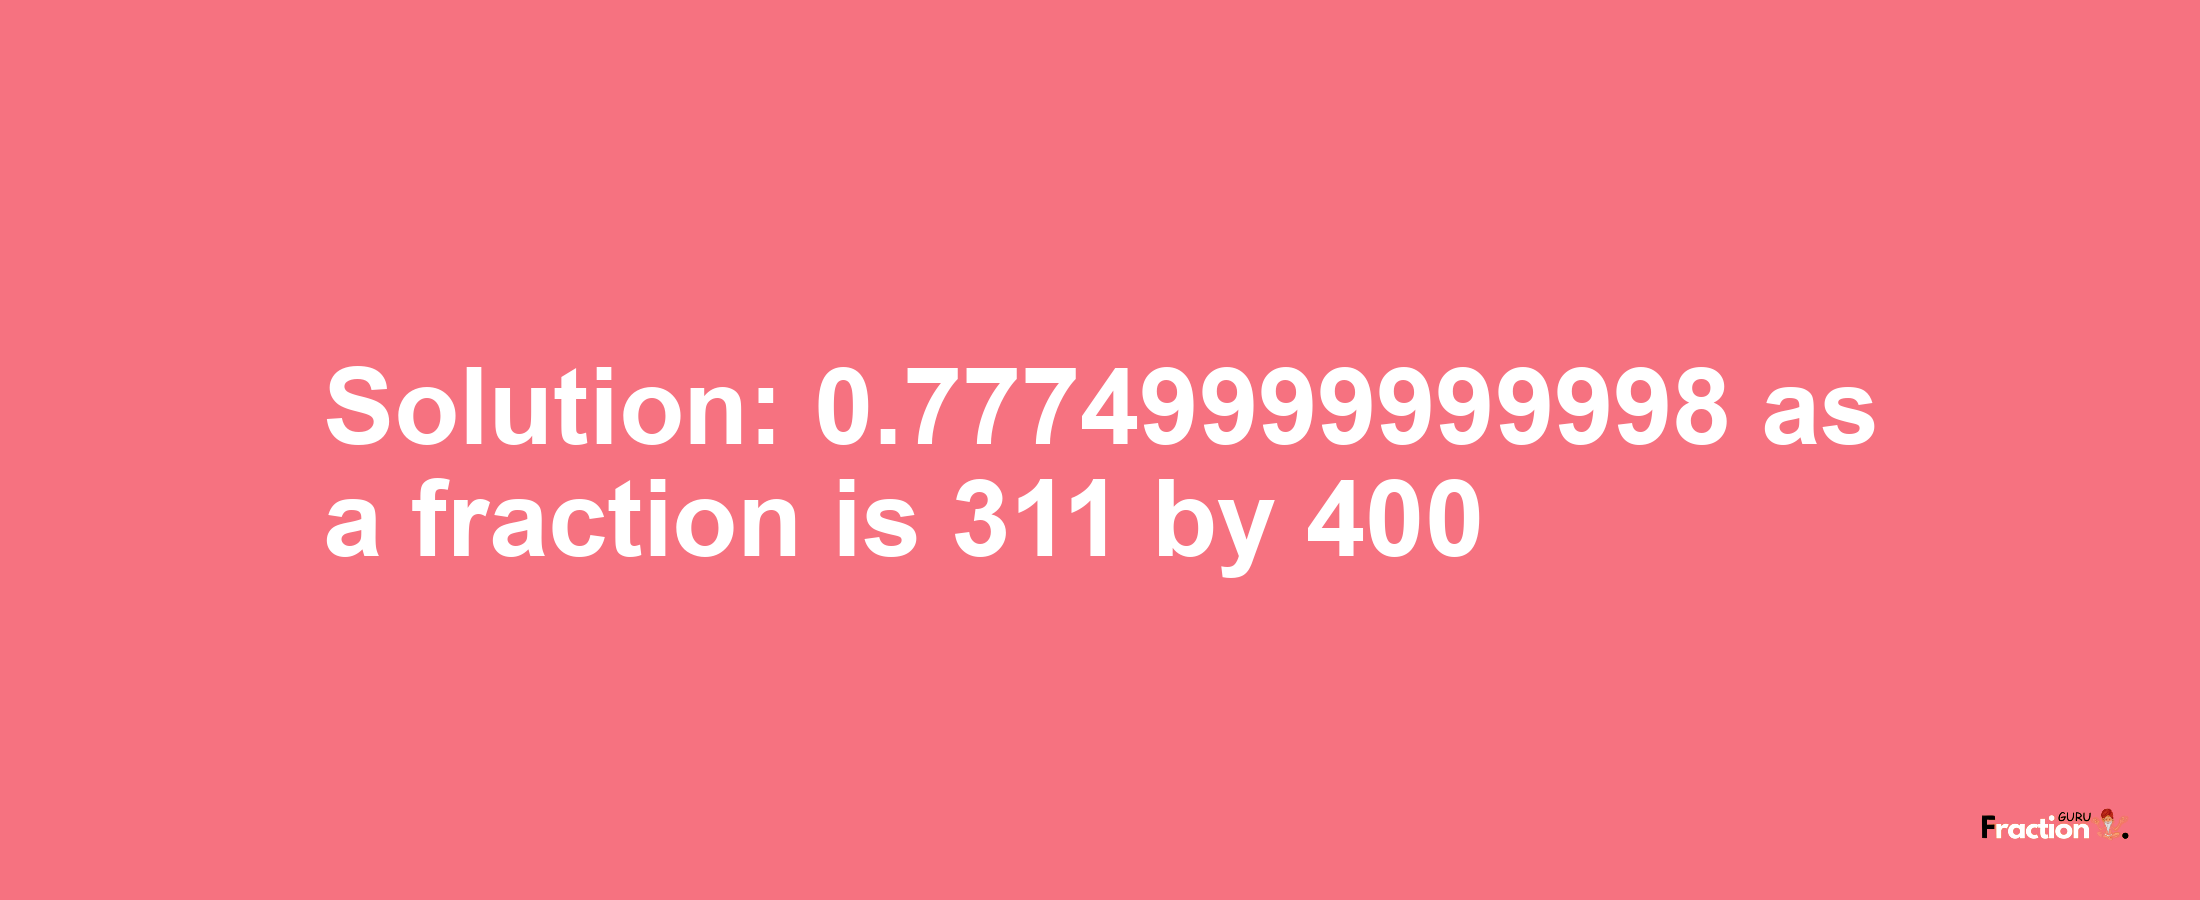 Solution:0.77749999999998 as a fraction is 311/400